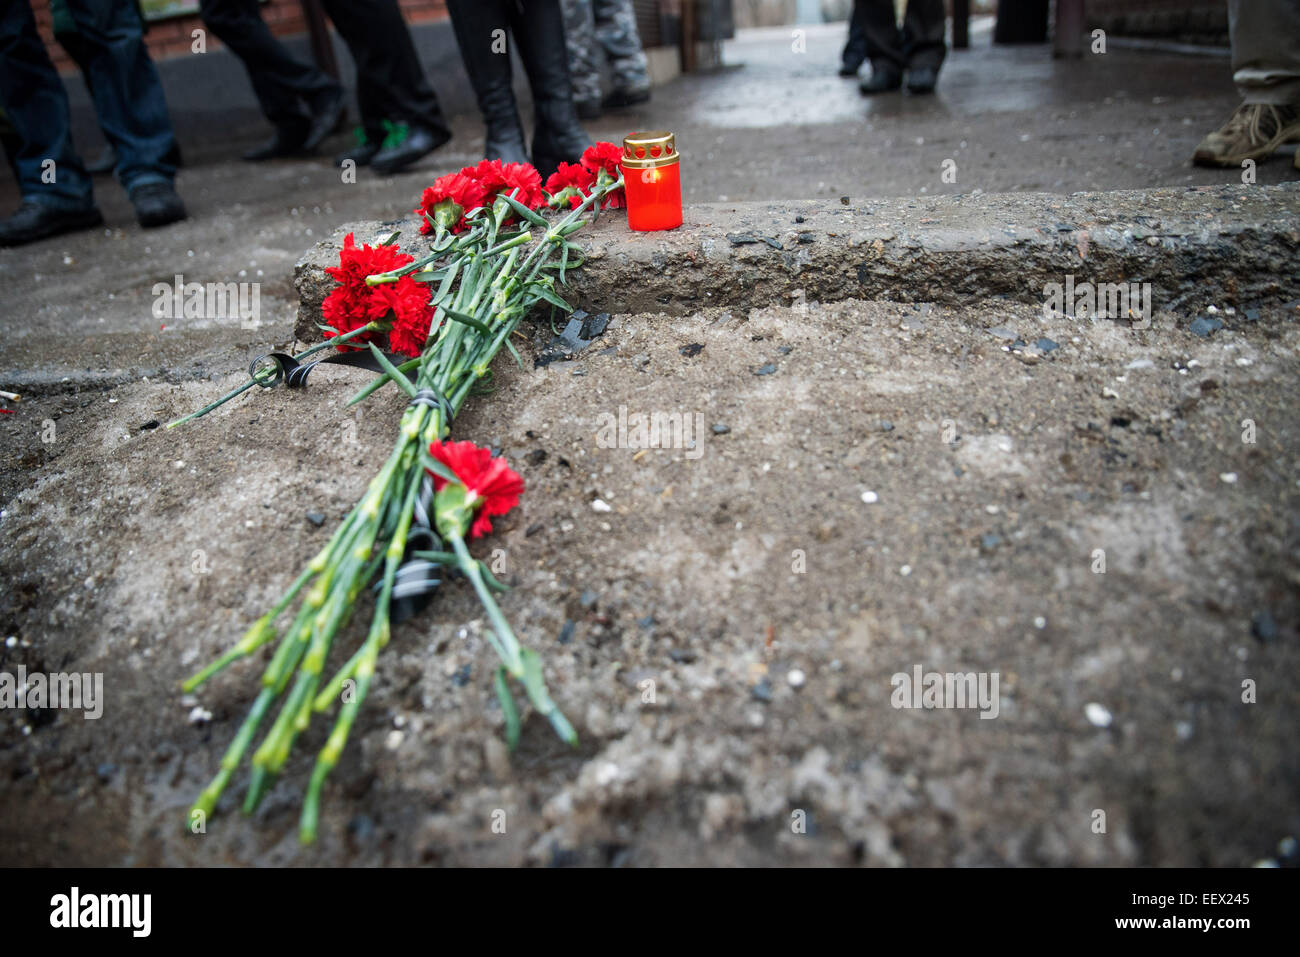 Flowers left for those killed in a mortar attack at a Donetsk bus station, 22 January 2015. A bus at the station was hit with shrapnel and unconfirmed reports say that 13 people were killed and up to 20 wounded. The DNR government has blamed pro-Ukrainian partisans for the attack. Photo: James Sprankle/dpa (zu dpa 'Tote und Verletzte bei Granateneinschlag an Haltestelle in Donezk' am 22.01.2015) Stock Photo